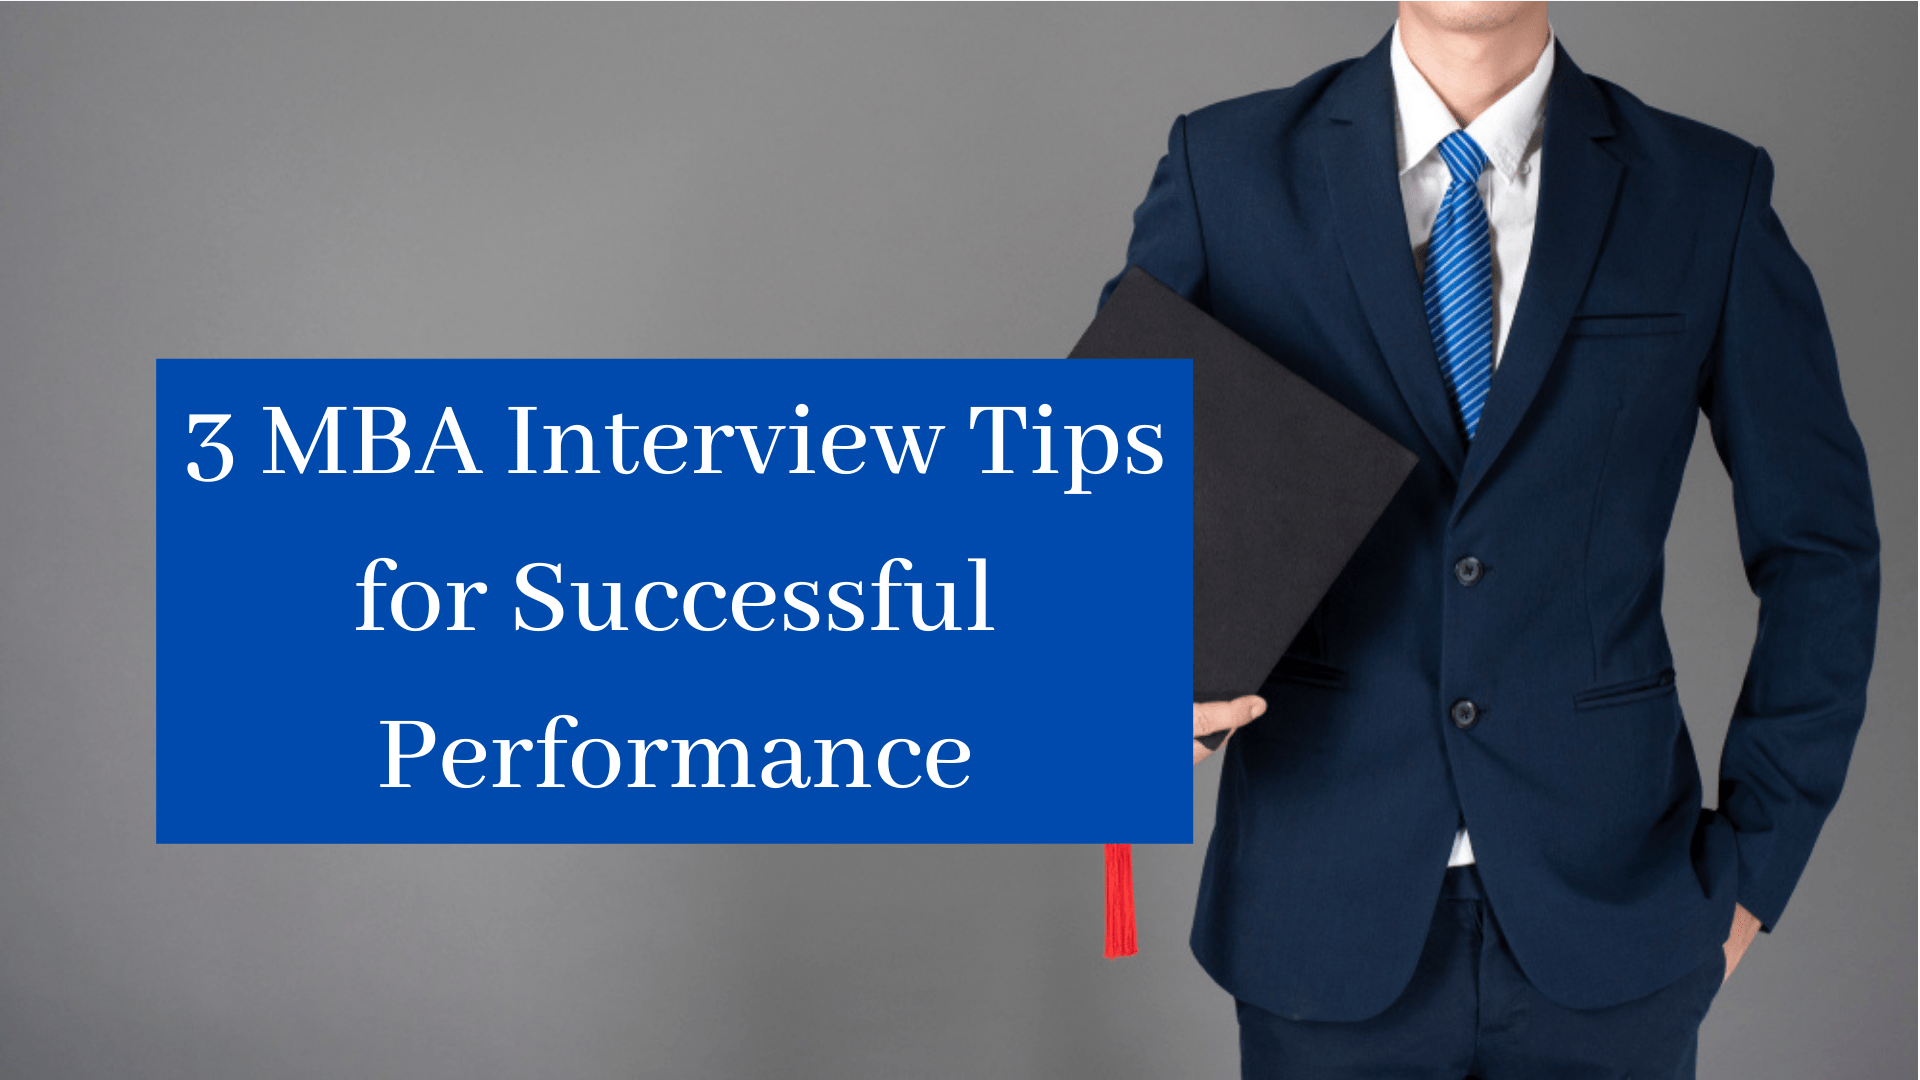 3 MBA Interview Tips for Successful Performance